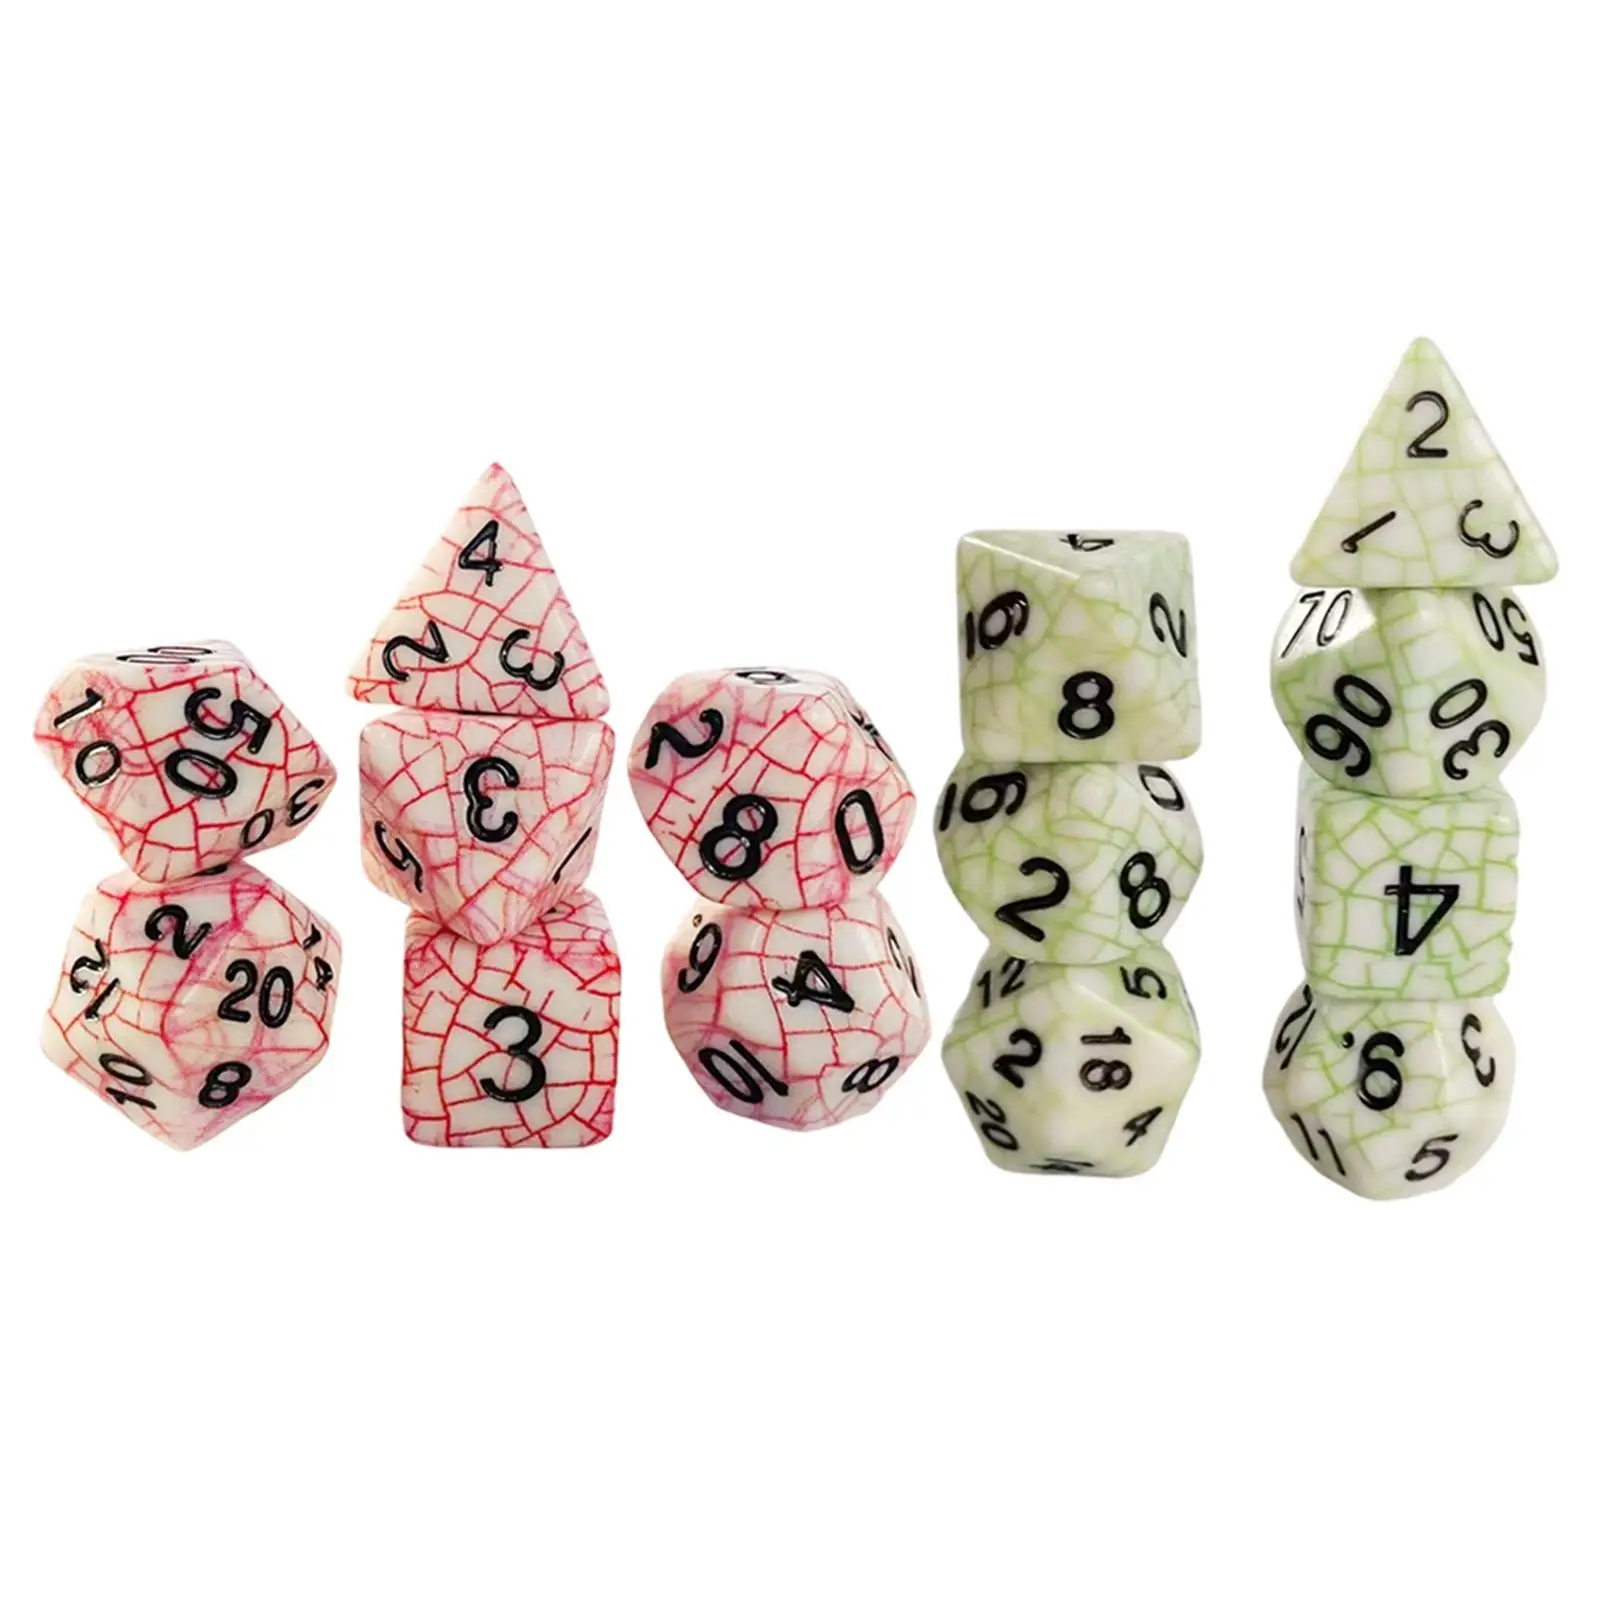 Set of 7 Polyhedron Dice, Multi Sided Dice Set, D4-D20 Die for Entertainment Tabletop Game DND RPG MTG Roleplaying Party Prop